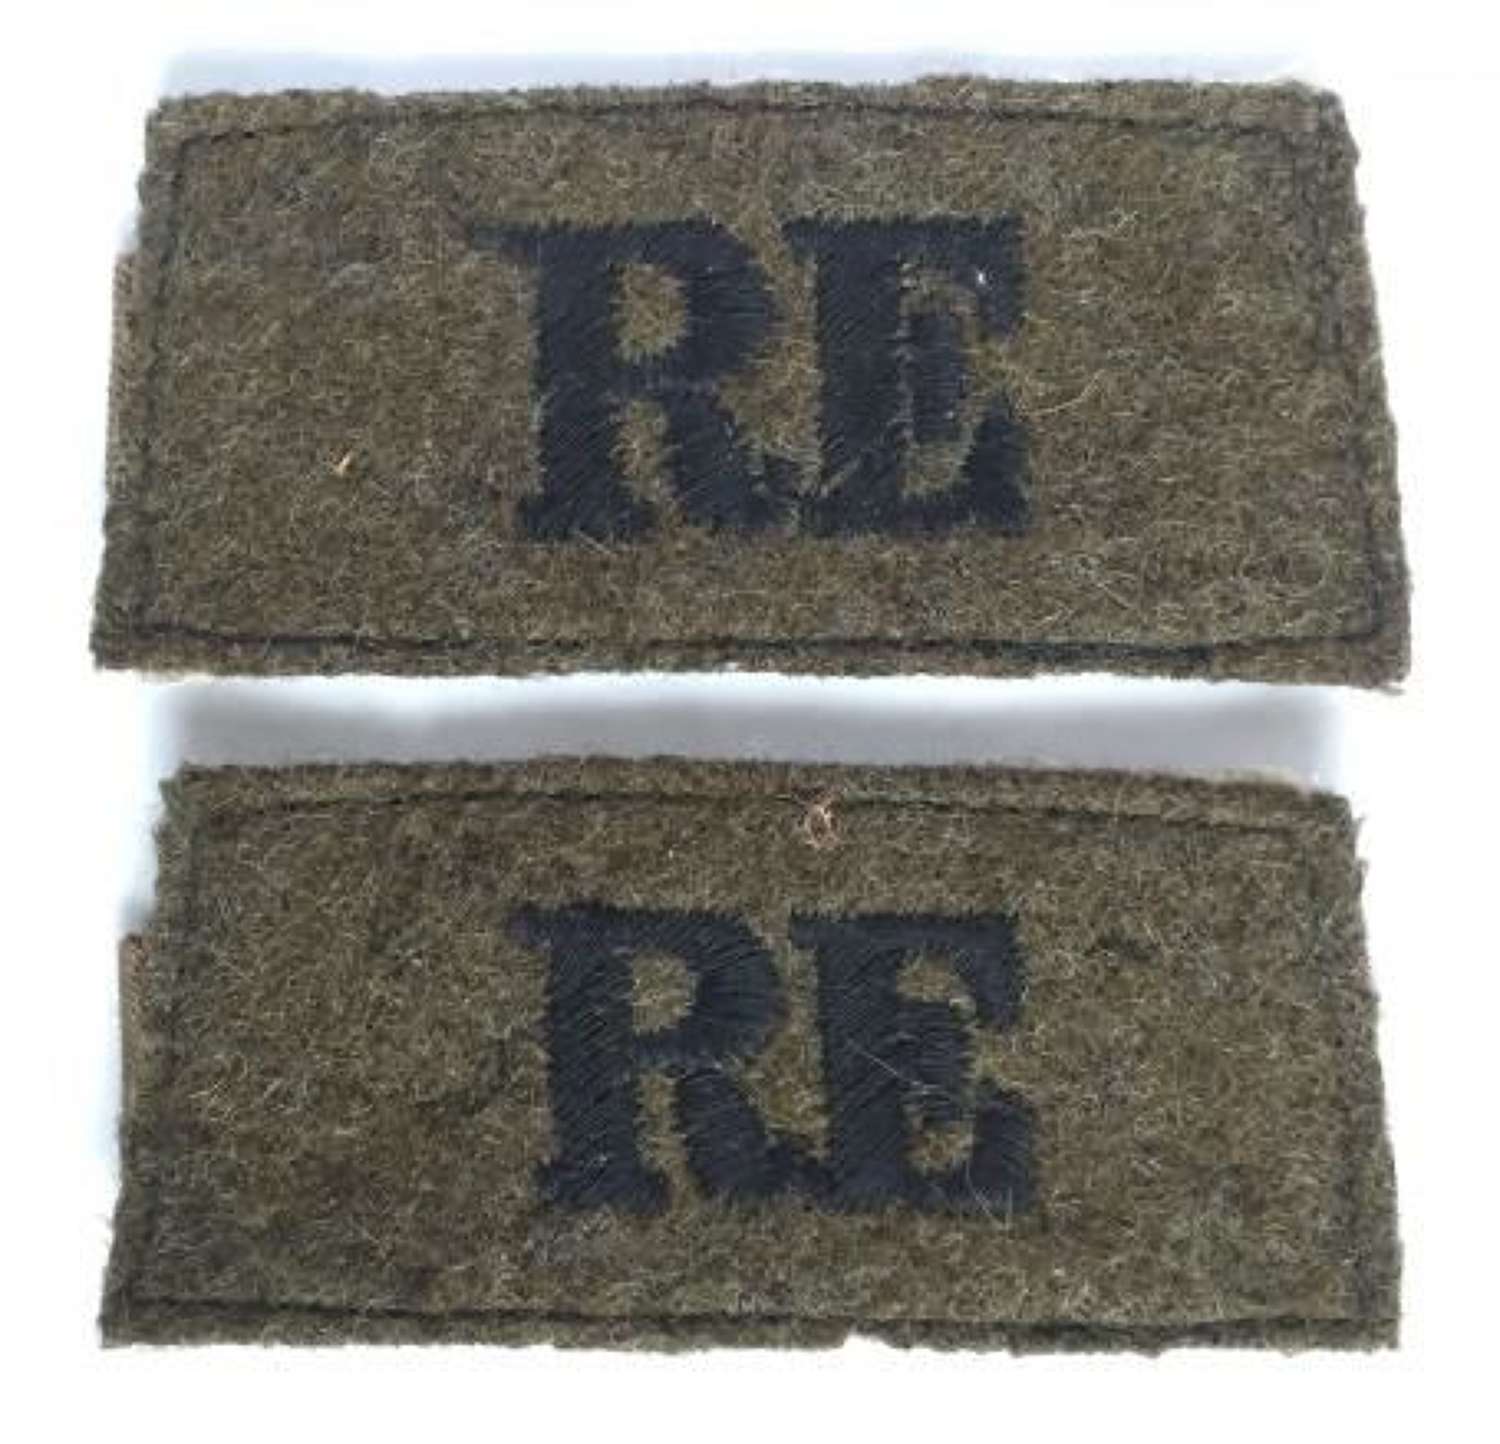 Original matched pair of Second World War Royal Engineers Cloth Should